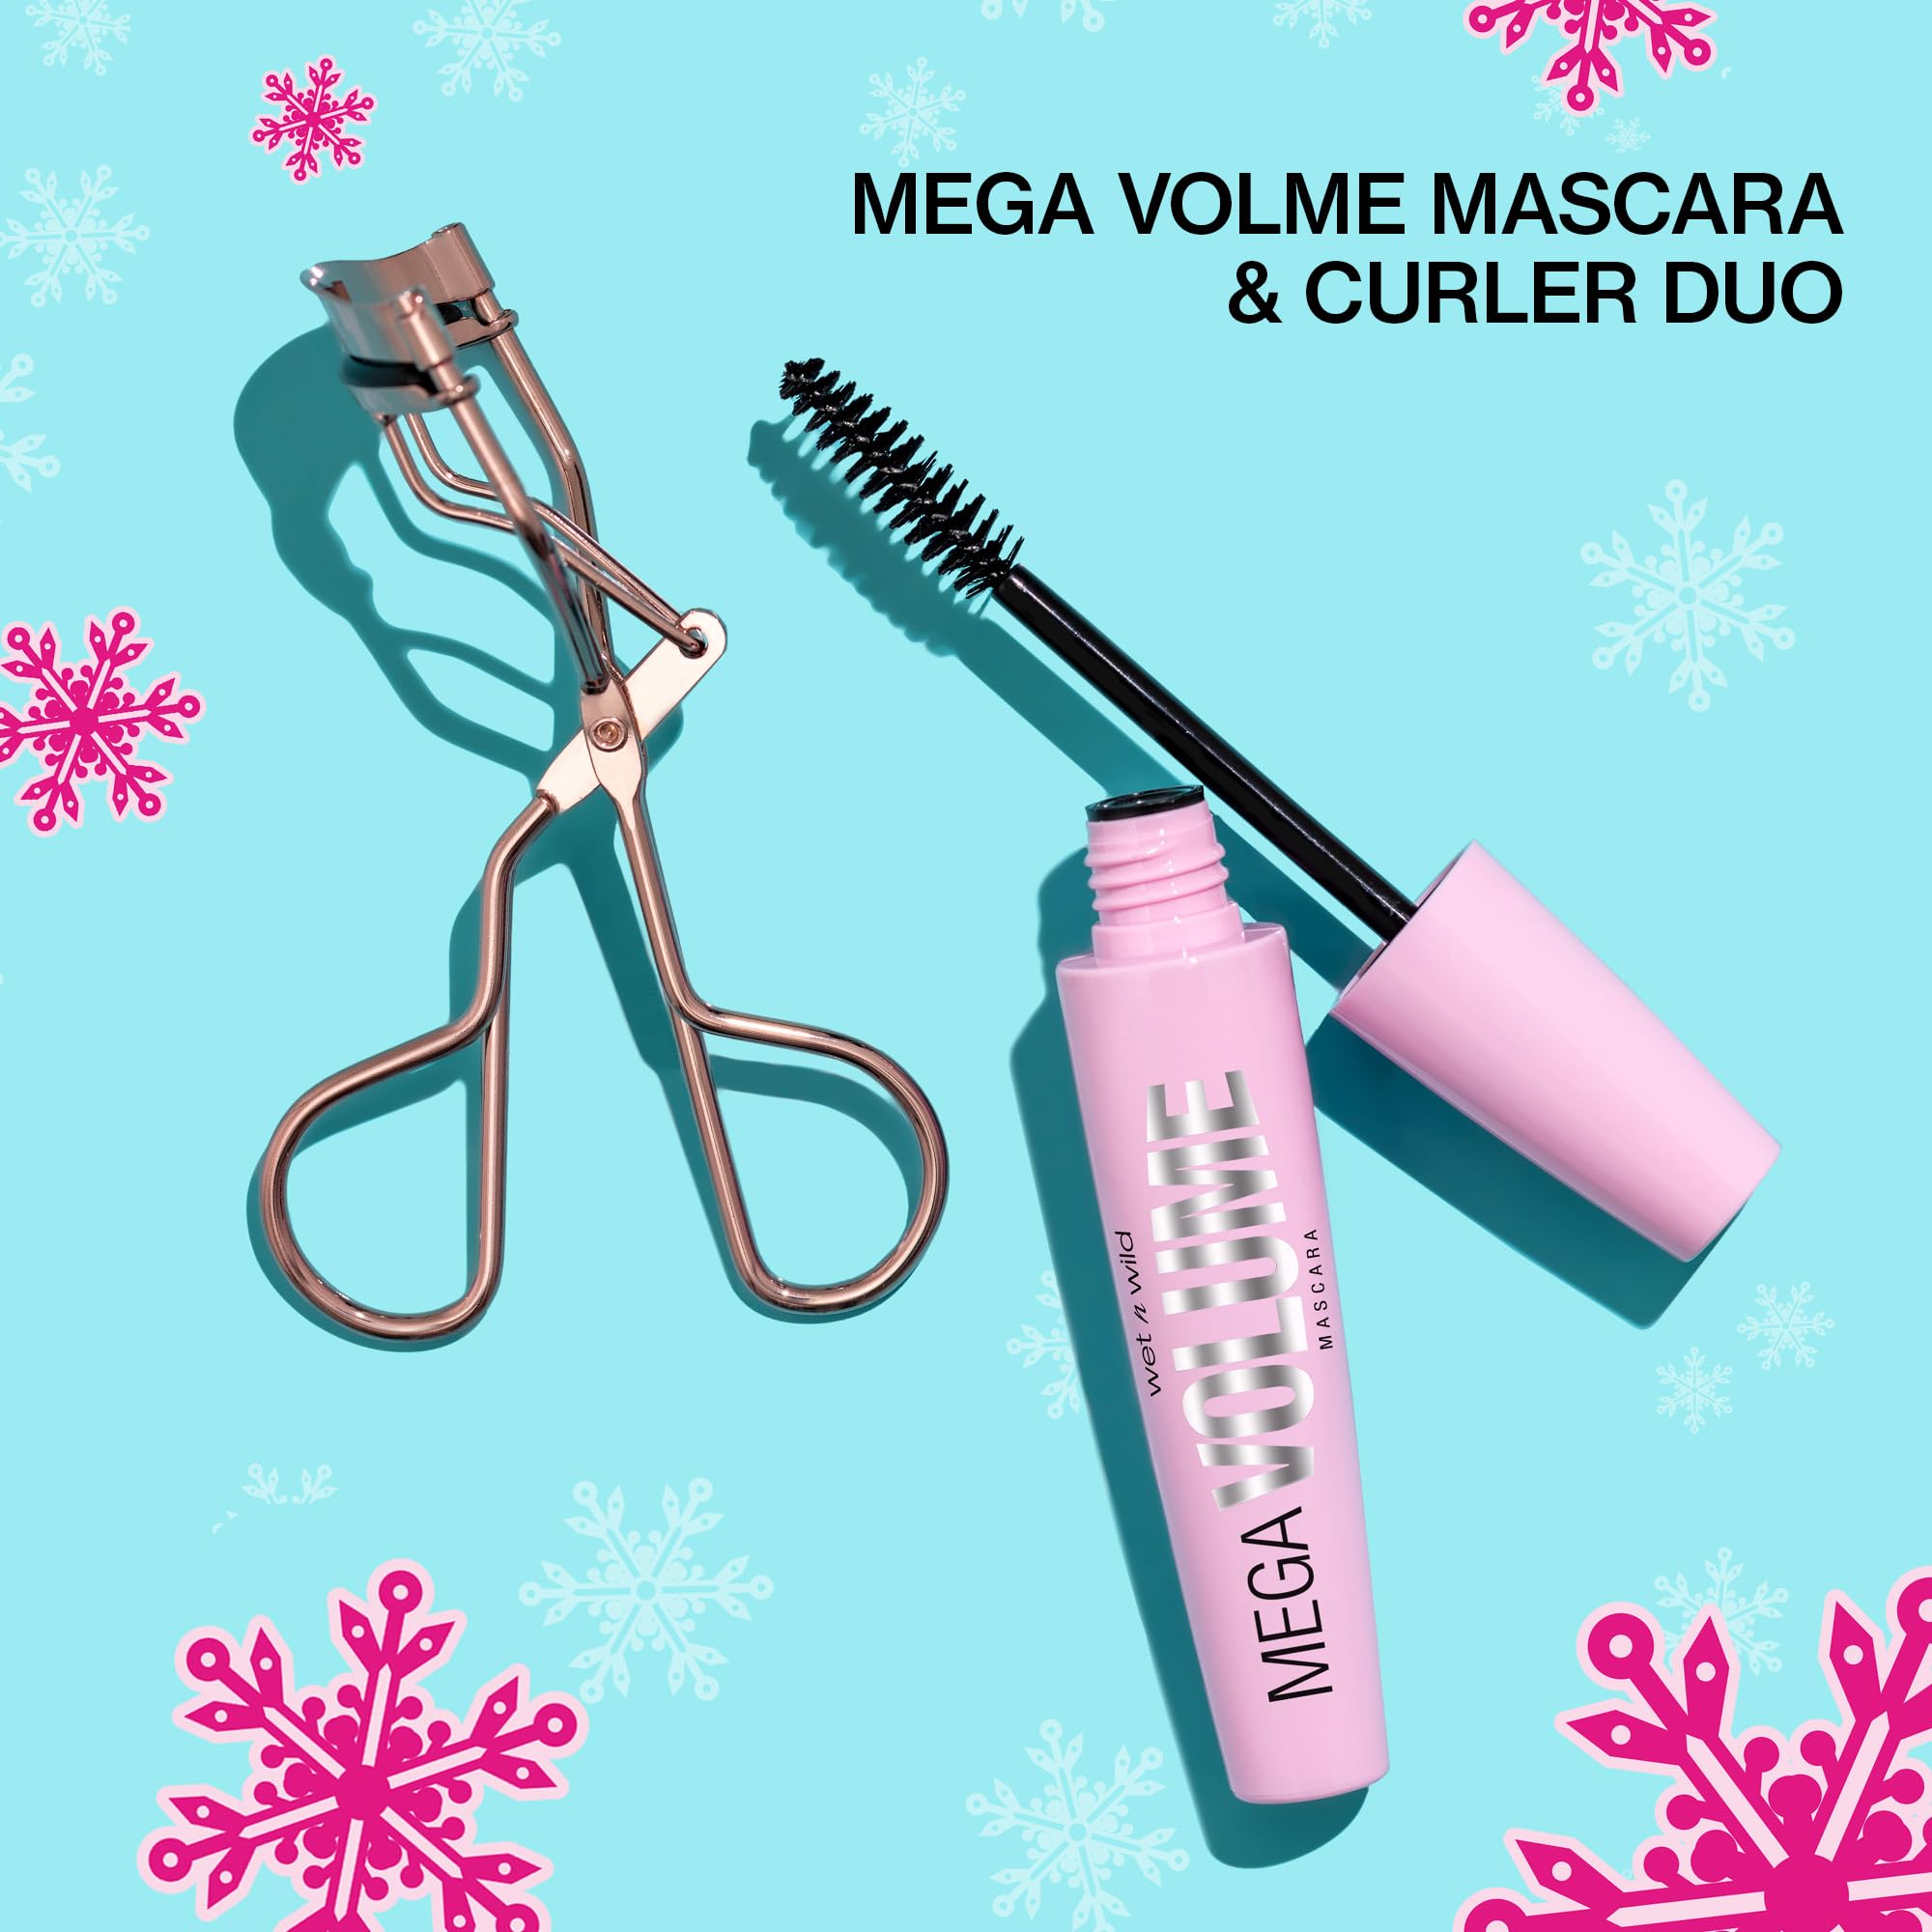 wet n wild The Wild List Mega Volume Mascara and Curler Duo | Holiday Gift Sets | Stocking Stuffers